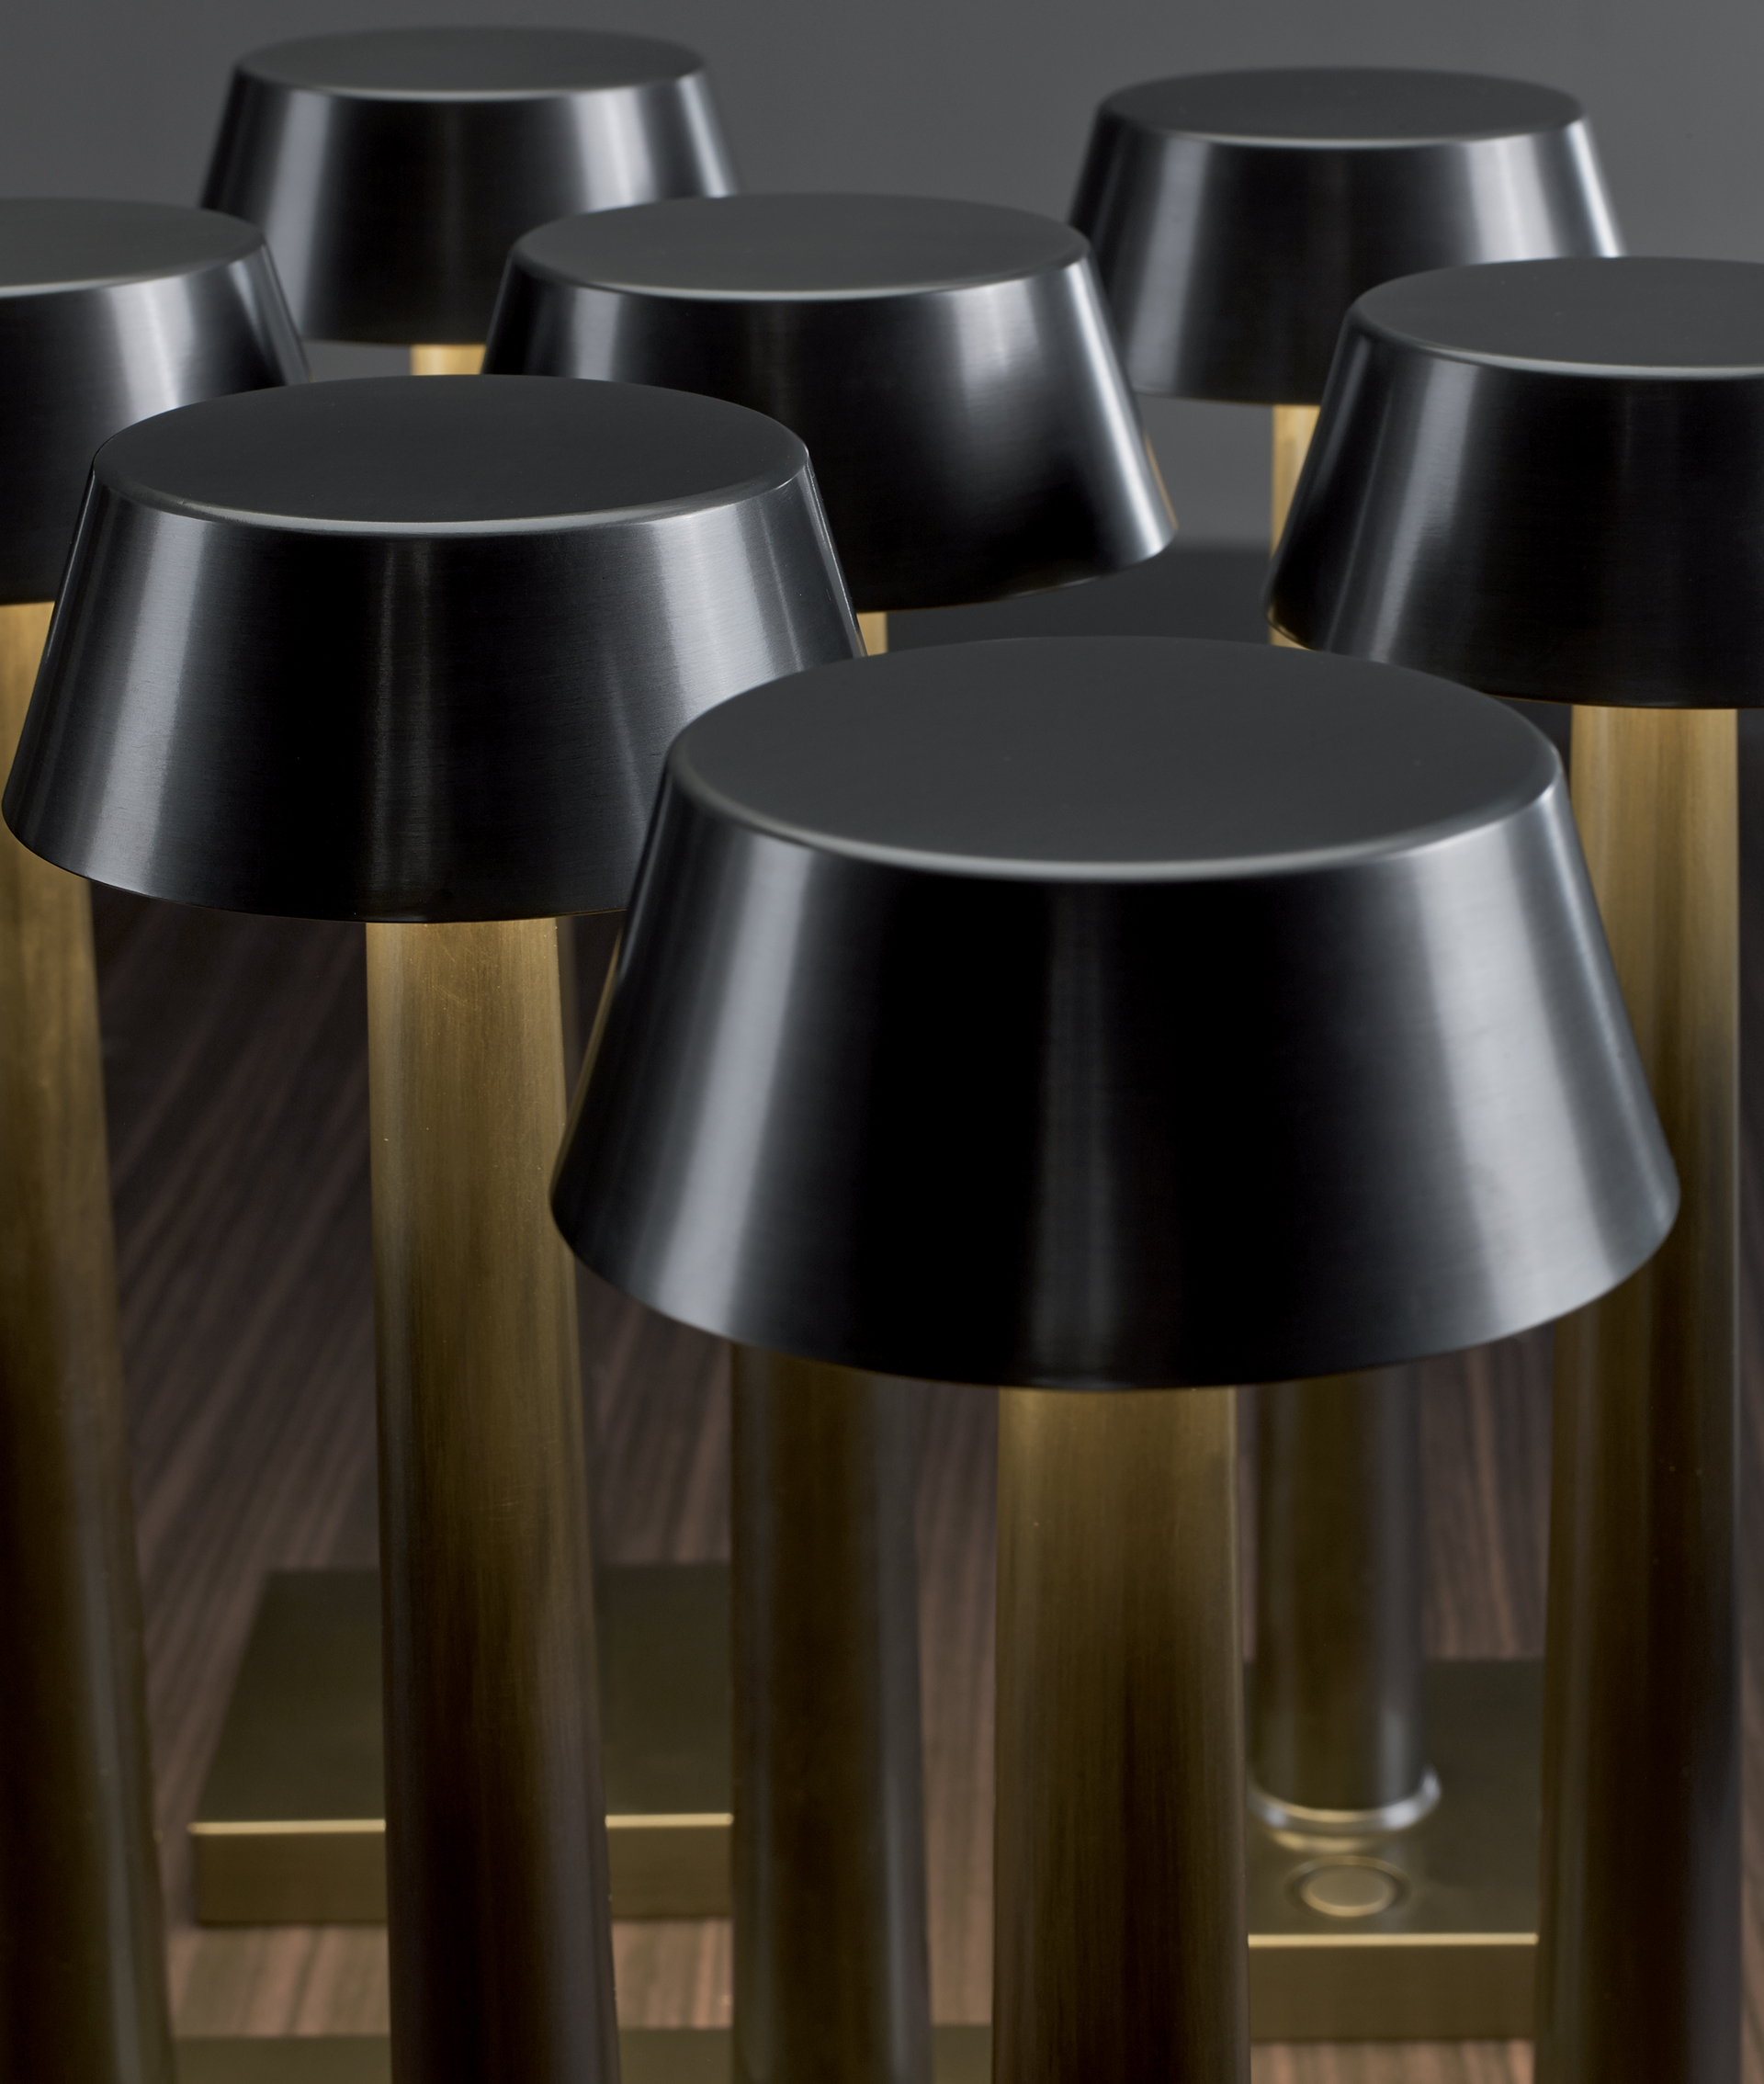 Fiammetta is a portable table LED lamp with bronze structure and touch switch, from Promemoria's catalogue | Promemoria